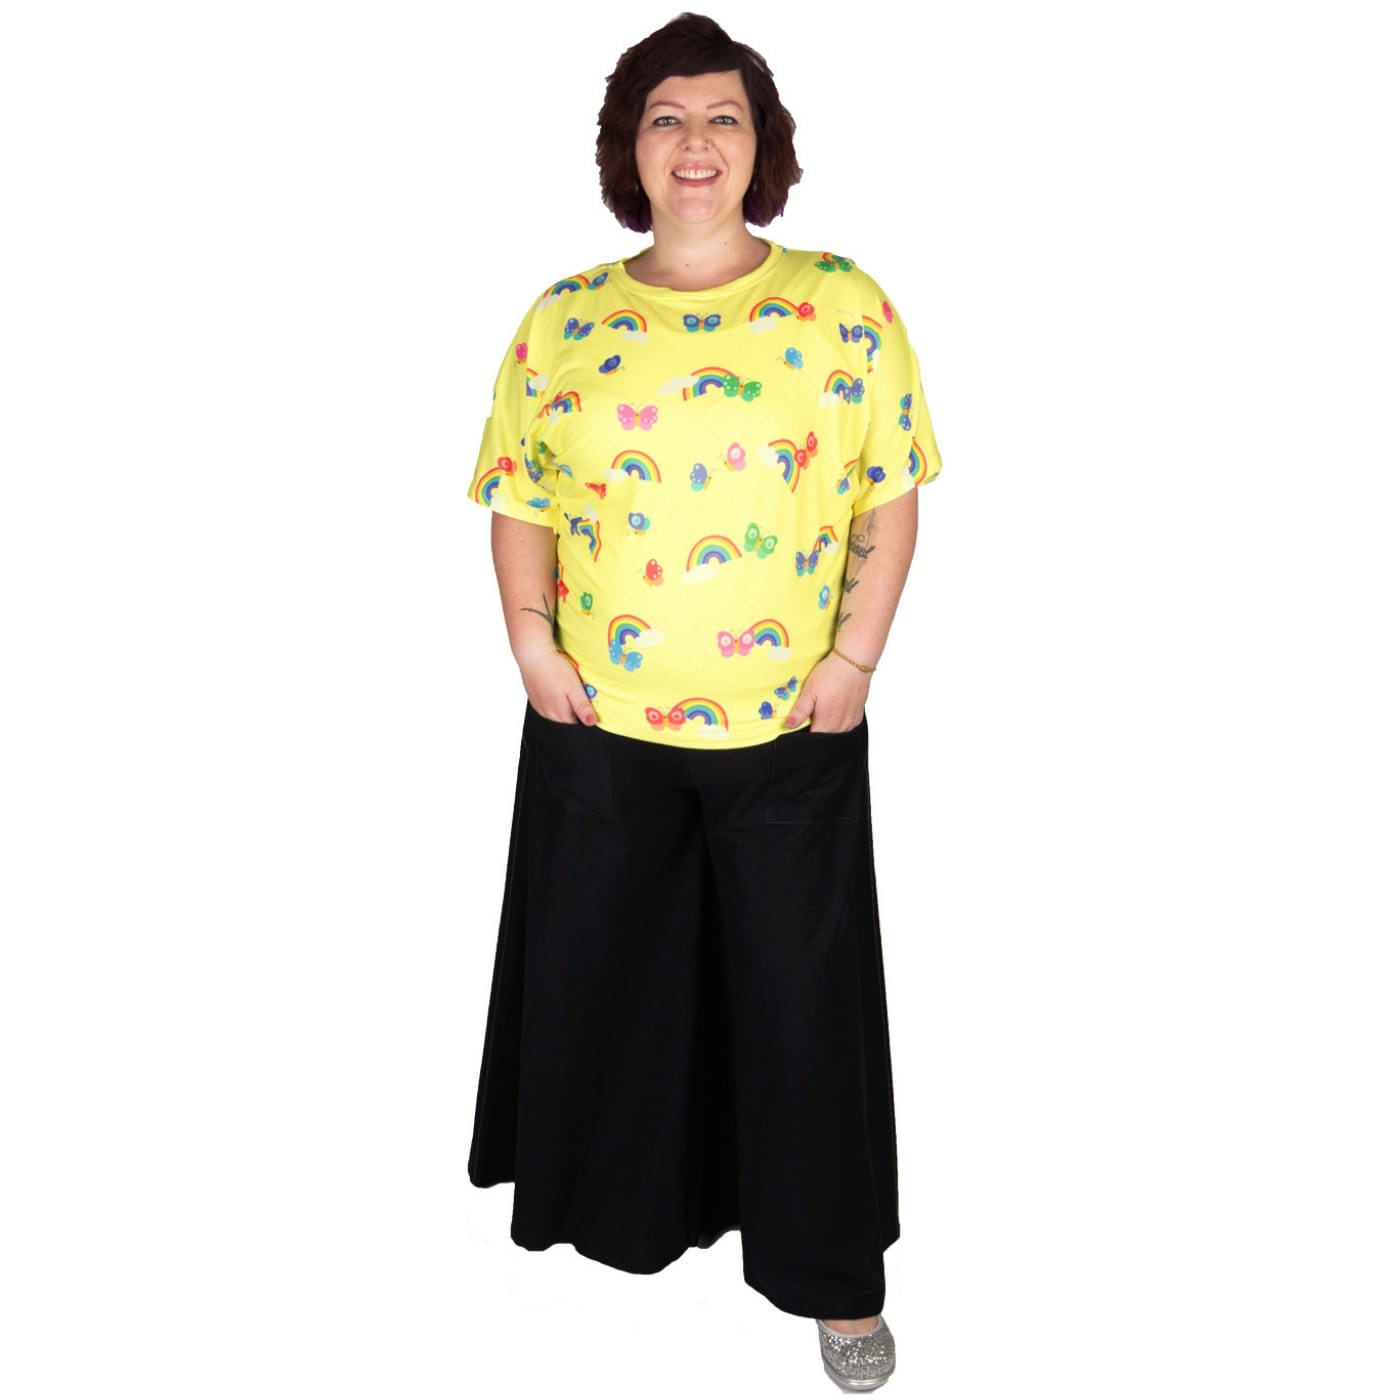 Sunshine Batwing Top by RainbowsAndFairies.com.au (Yellow Polka Dot - Butterfly - Rainbows - Clouds - Vintage Inspired - Kitsch - Knit Top - Mod) - SKU: CL_BATOP_SUNSH_ORG - Pic-02